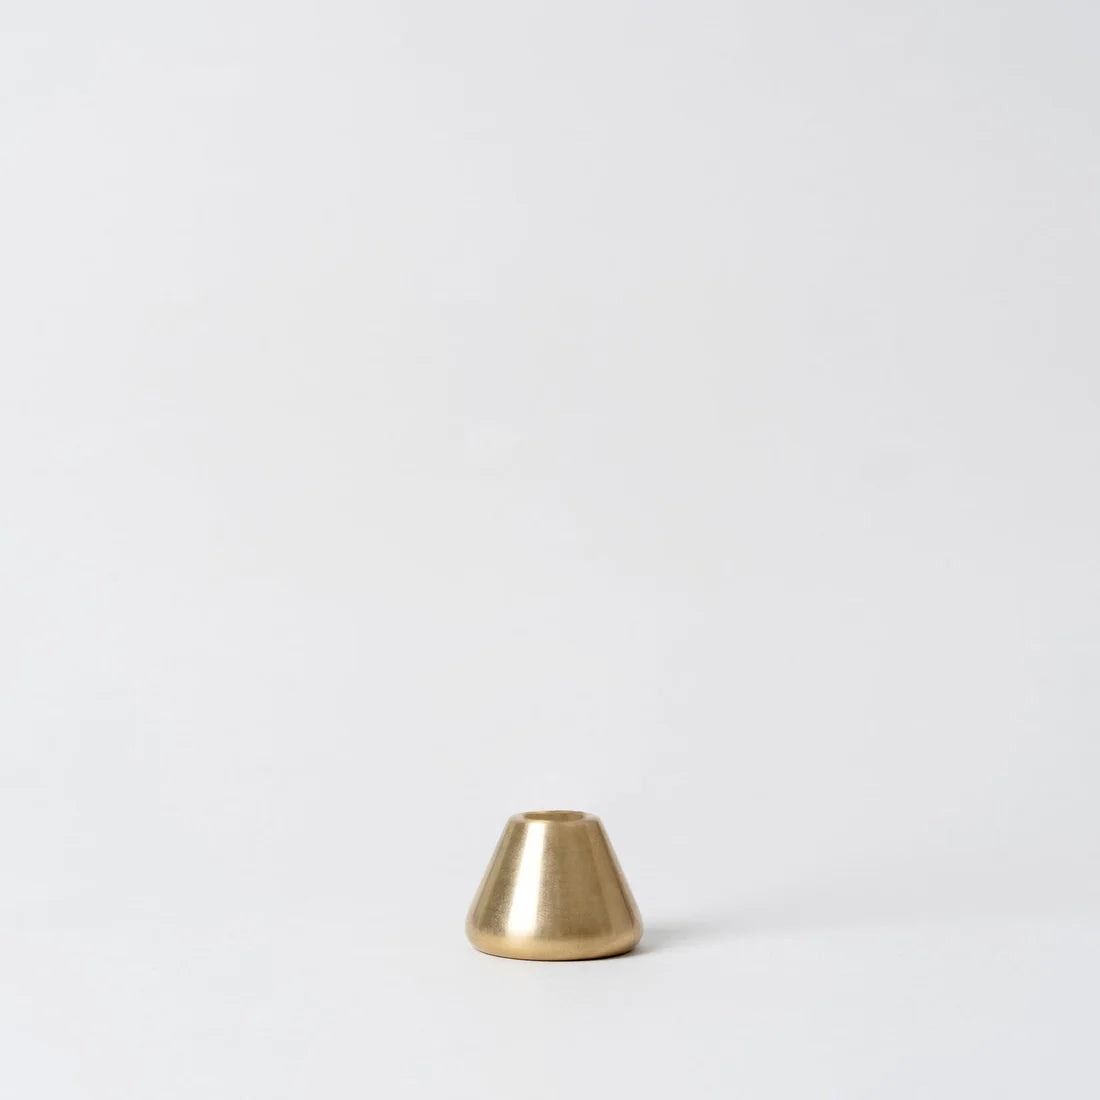 Makers Cabinet Lazlo Drop Stand: Brass - Melbourne Etching Supplies